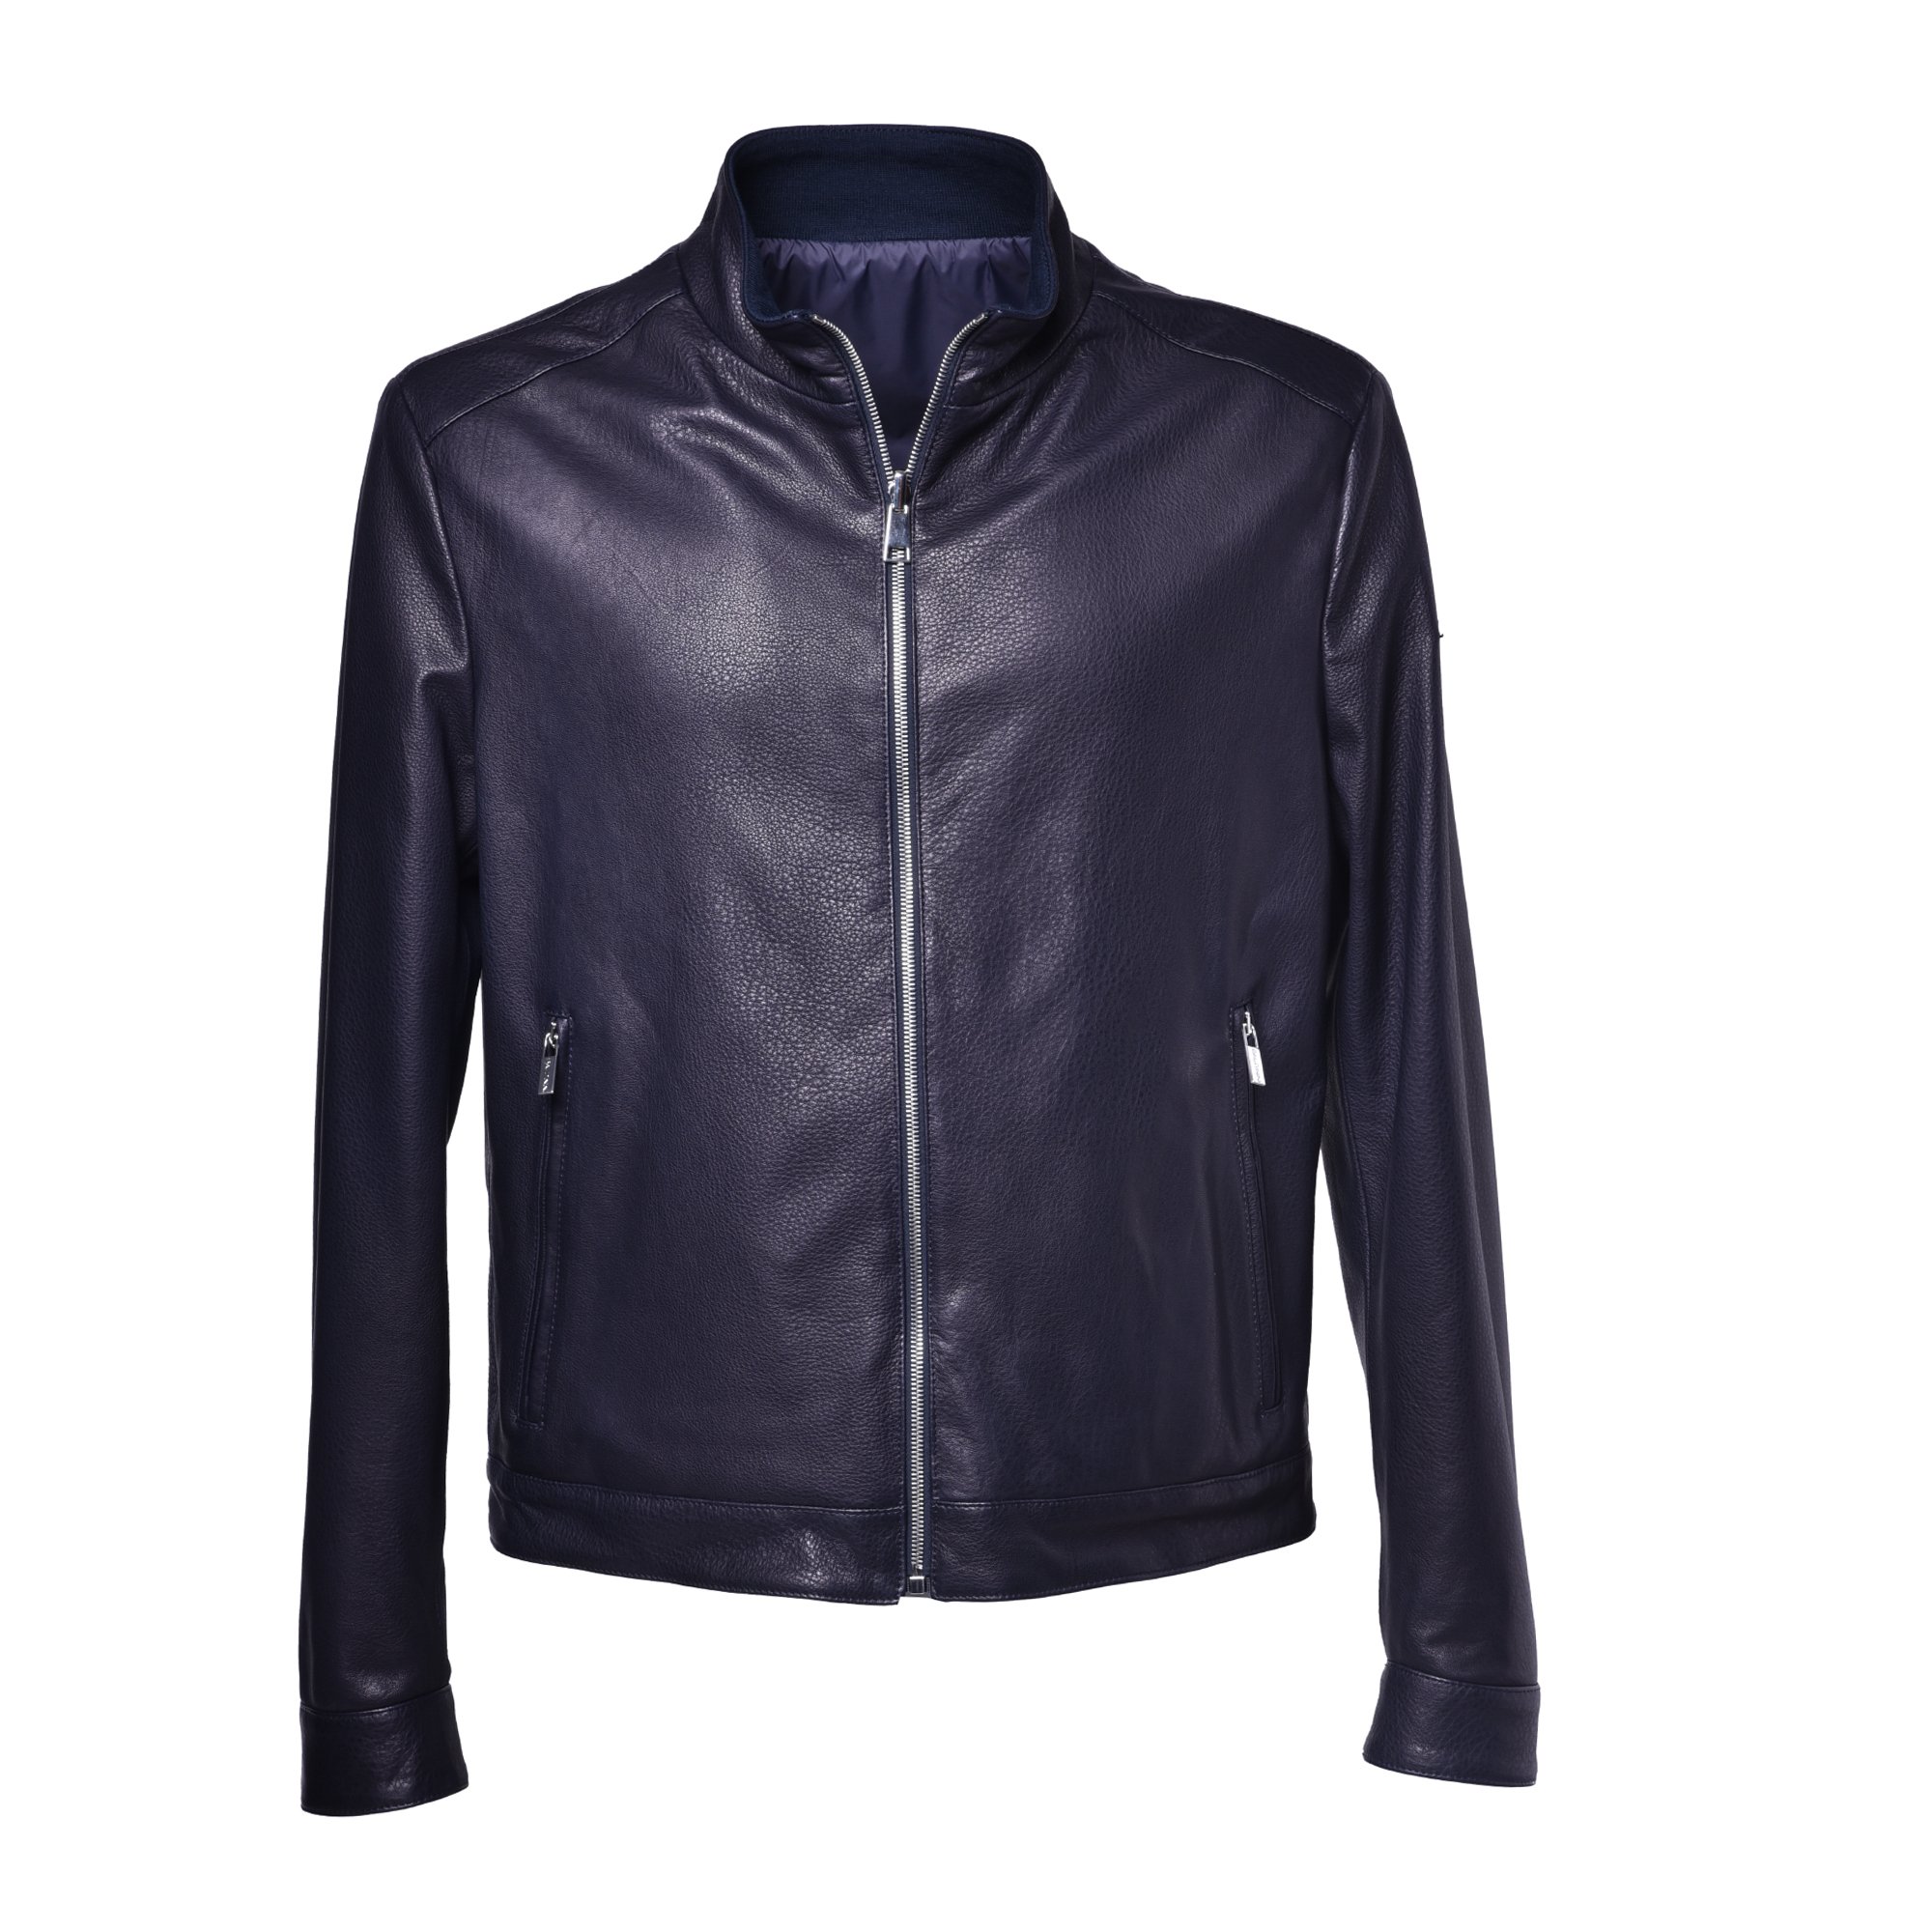 Reversible jacket in navy blue nappa leather image